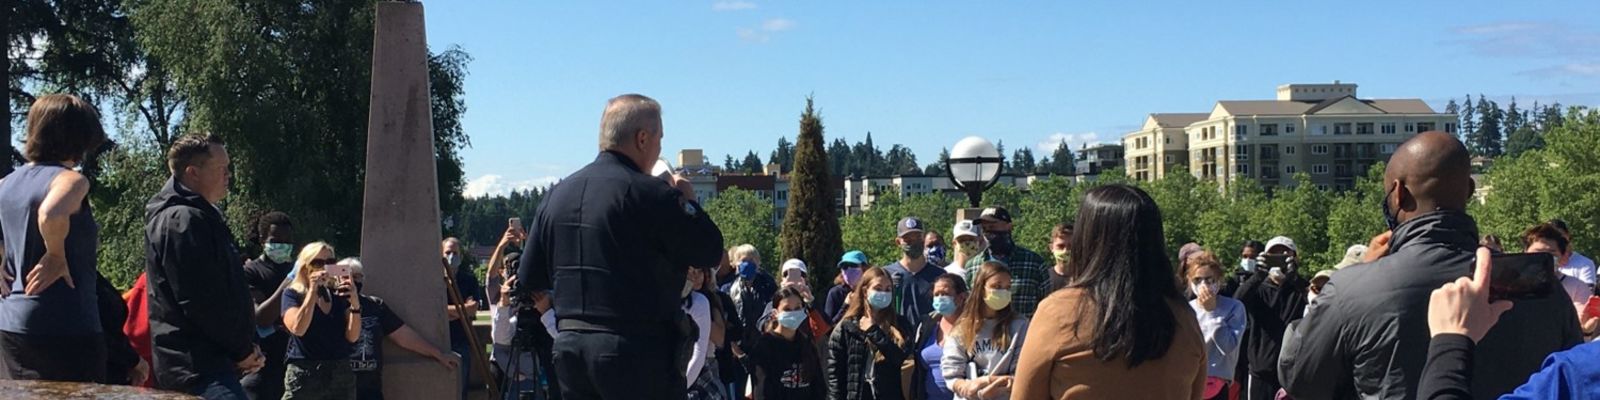 Police Chief Steve Mylett speaks at a rally following protests.